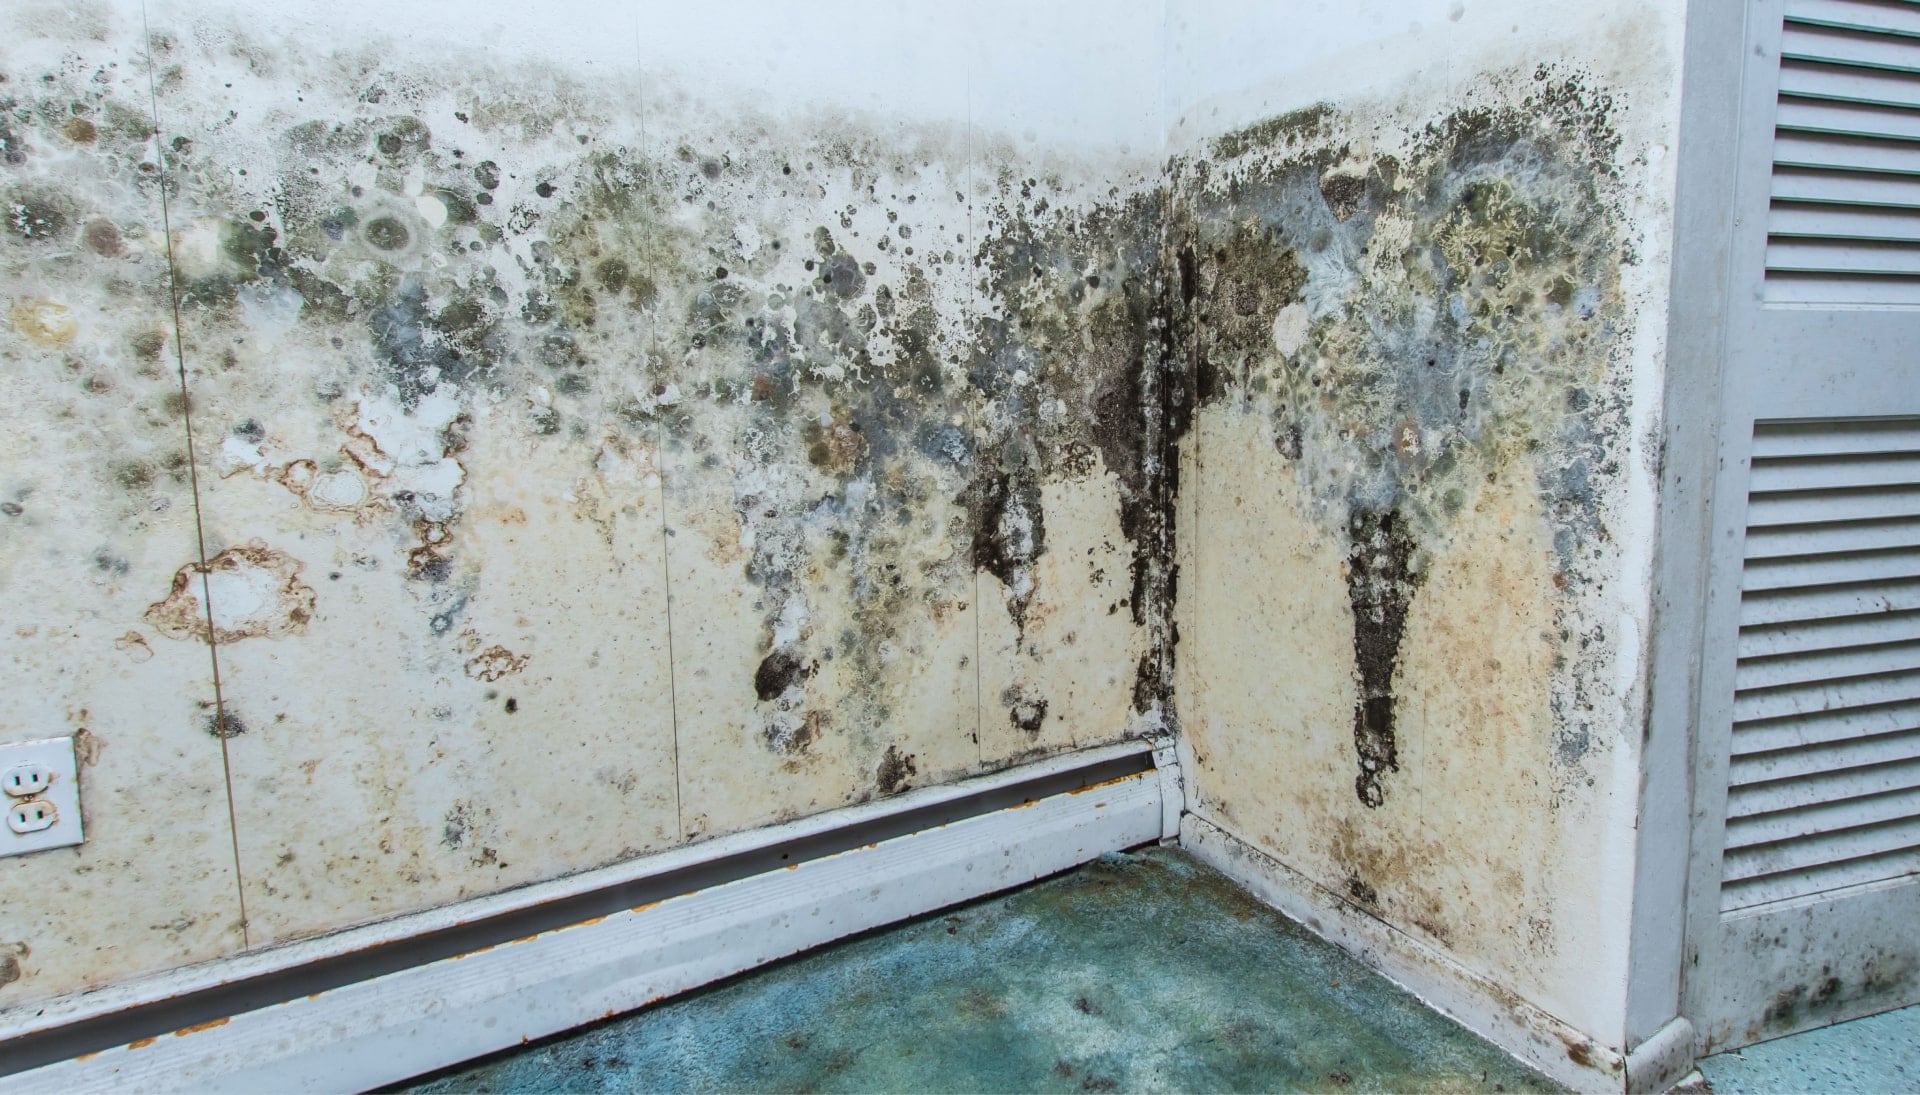 Mold Damager Odor Control Services in Lansing